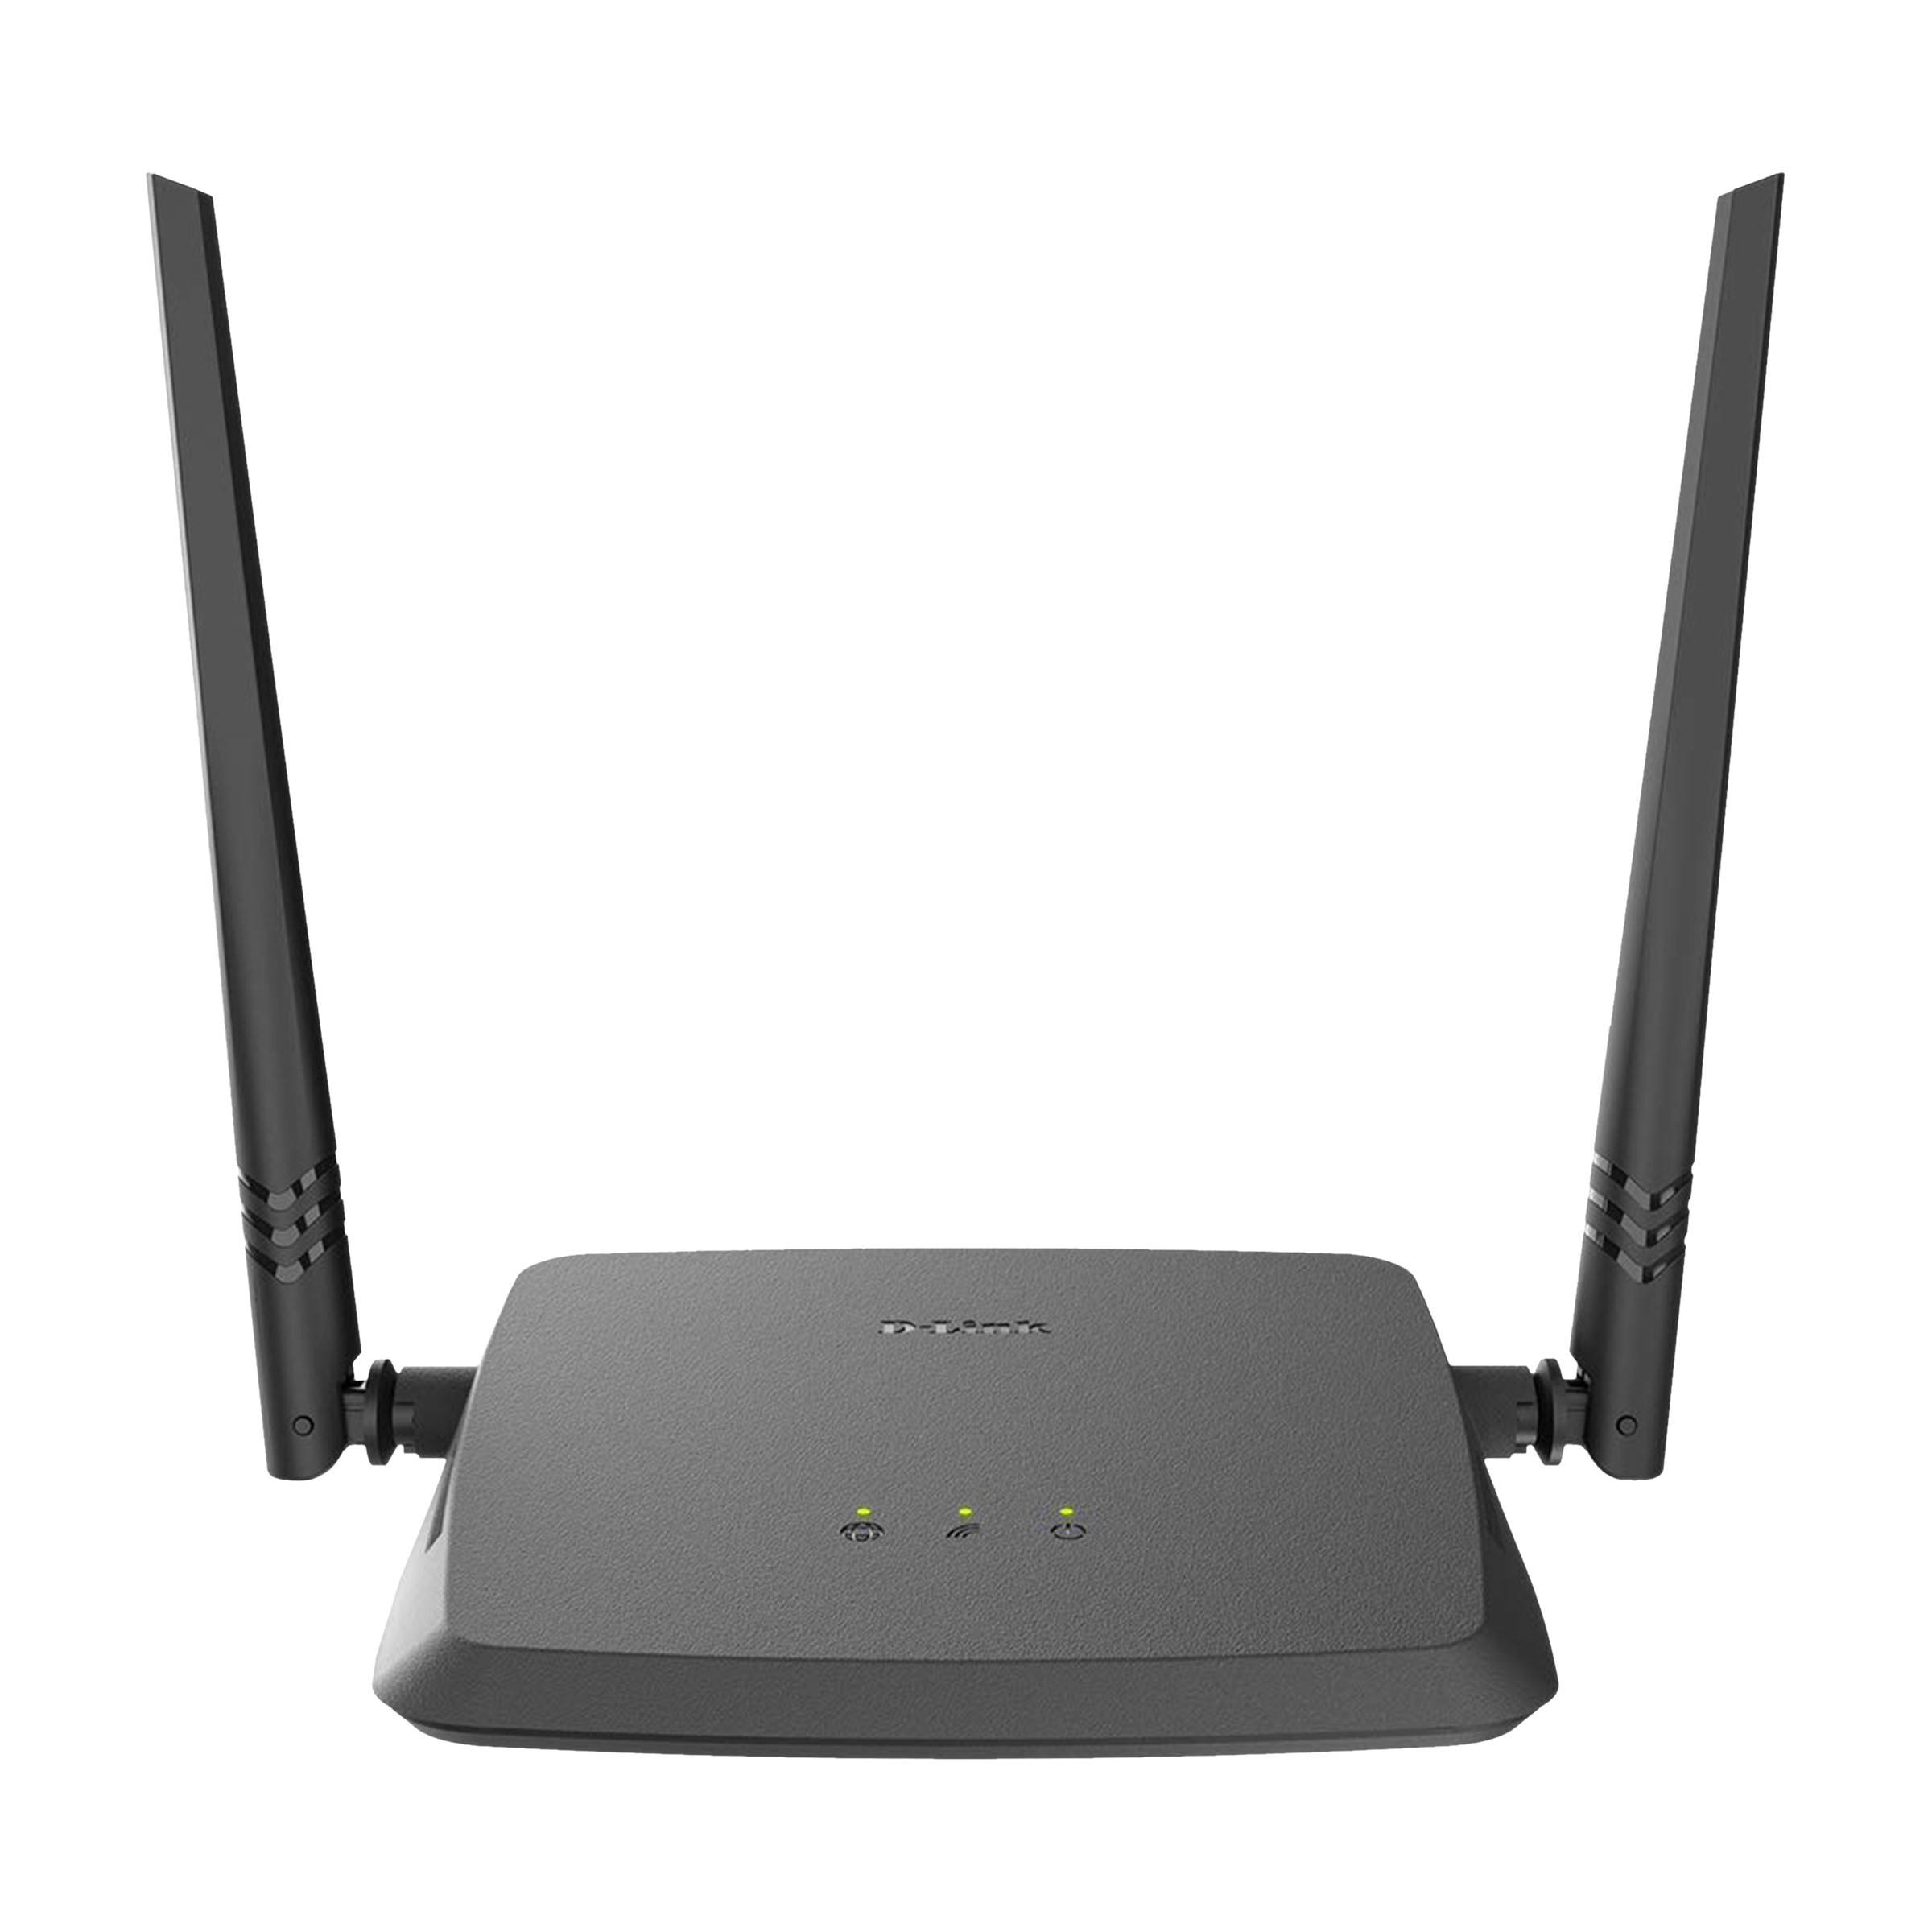 D-Link N300 Single Band 300 Mbps WiFi Router (2 Antennas, 4 LAN Ports, Wireless Guest Zone, DIR-615, Black)_1